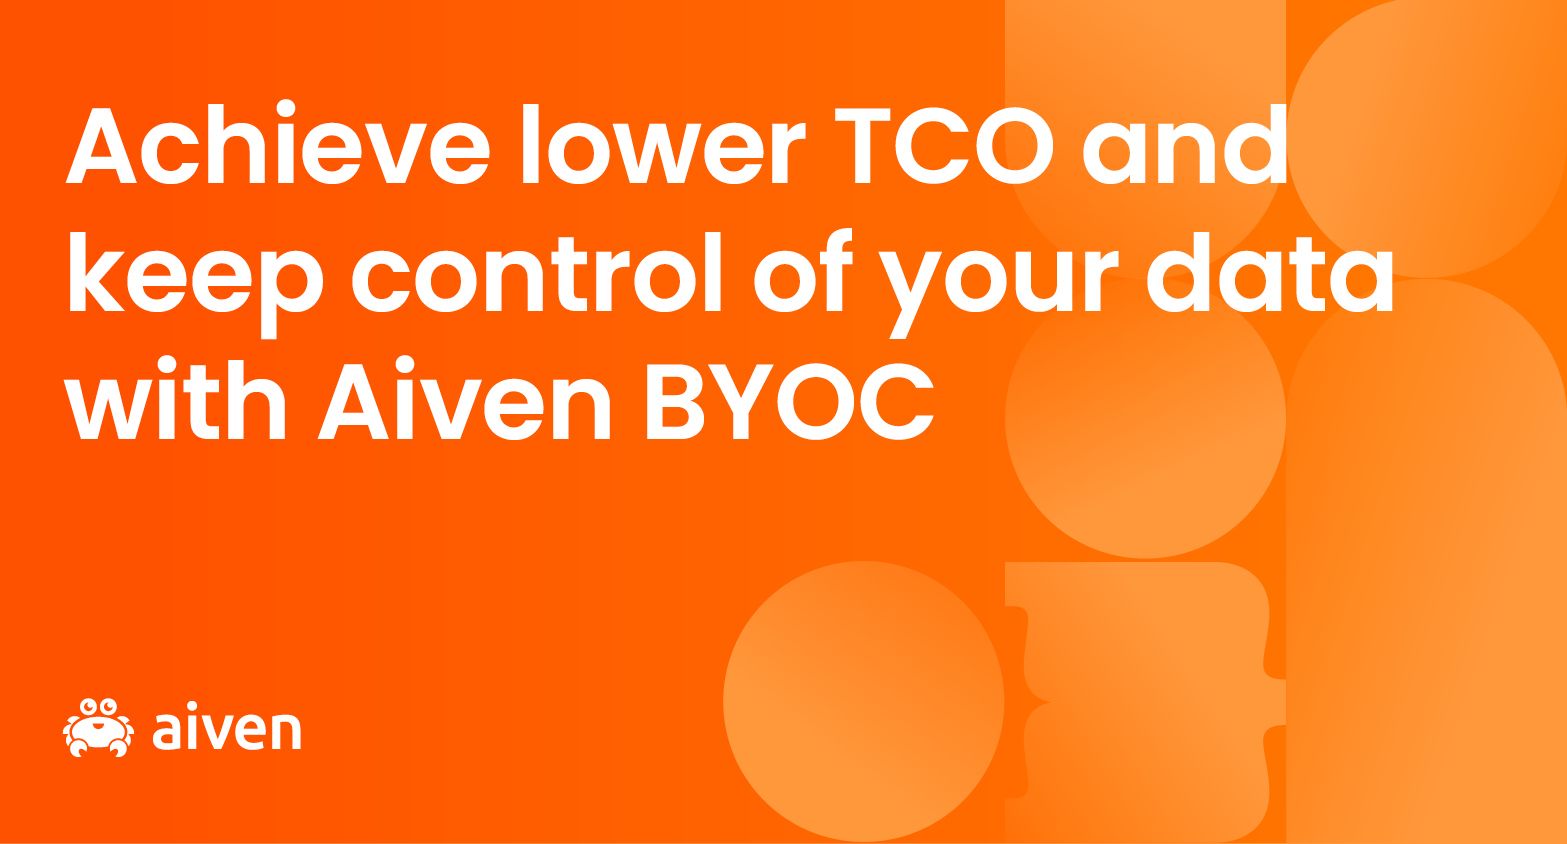 Optimize your cloud data infrastructure spend with Aiven’s Bring Your Own Cloud (BYOC) illustration